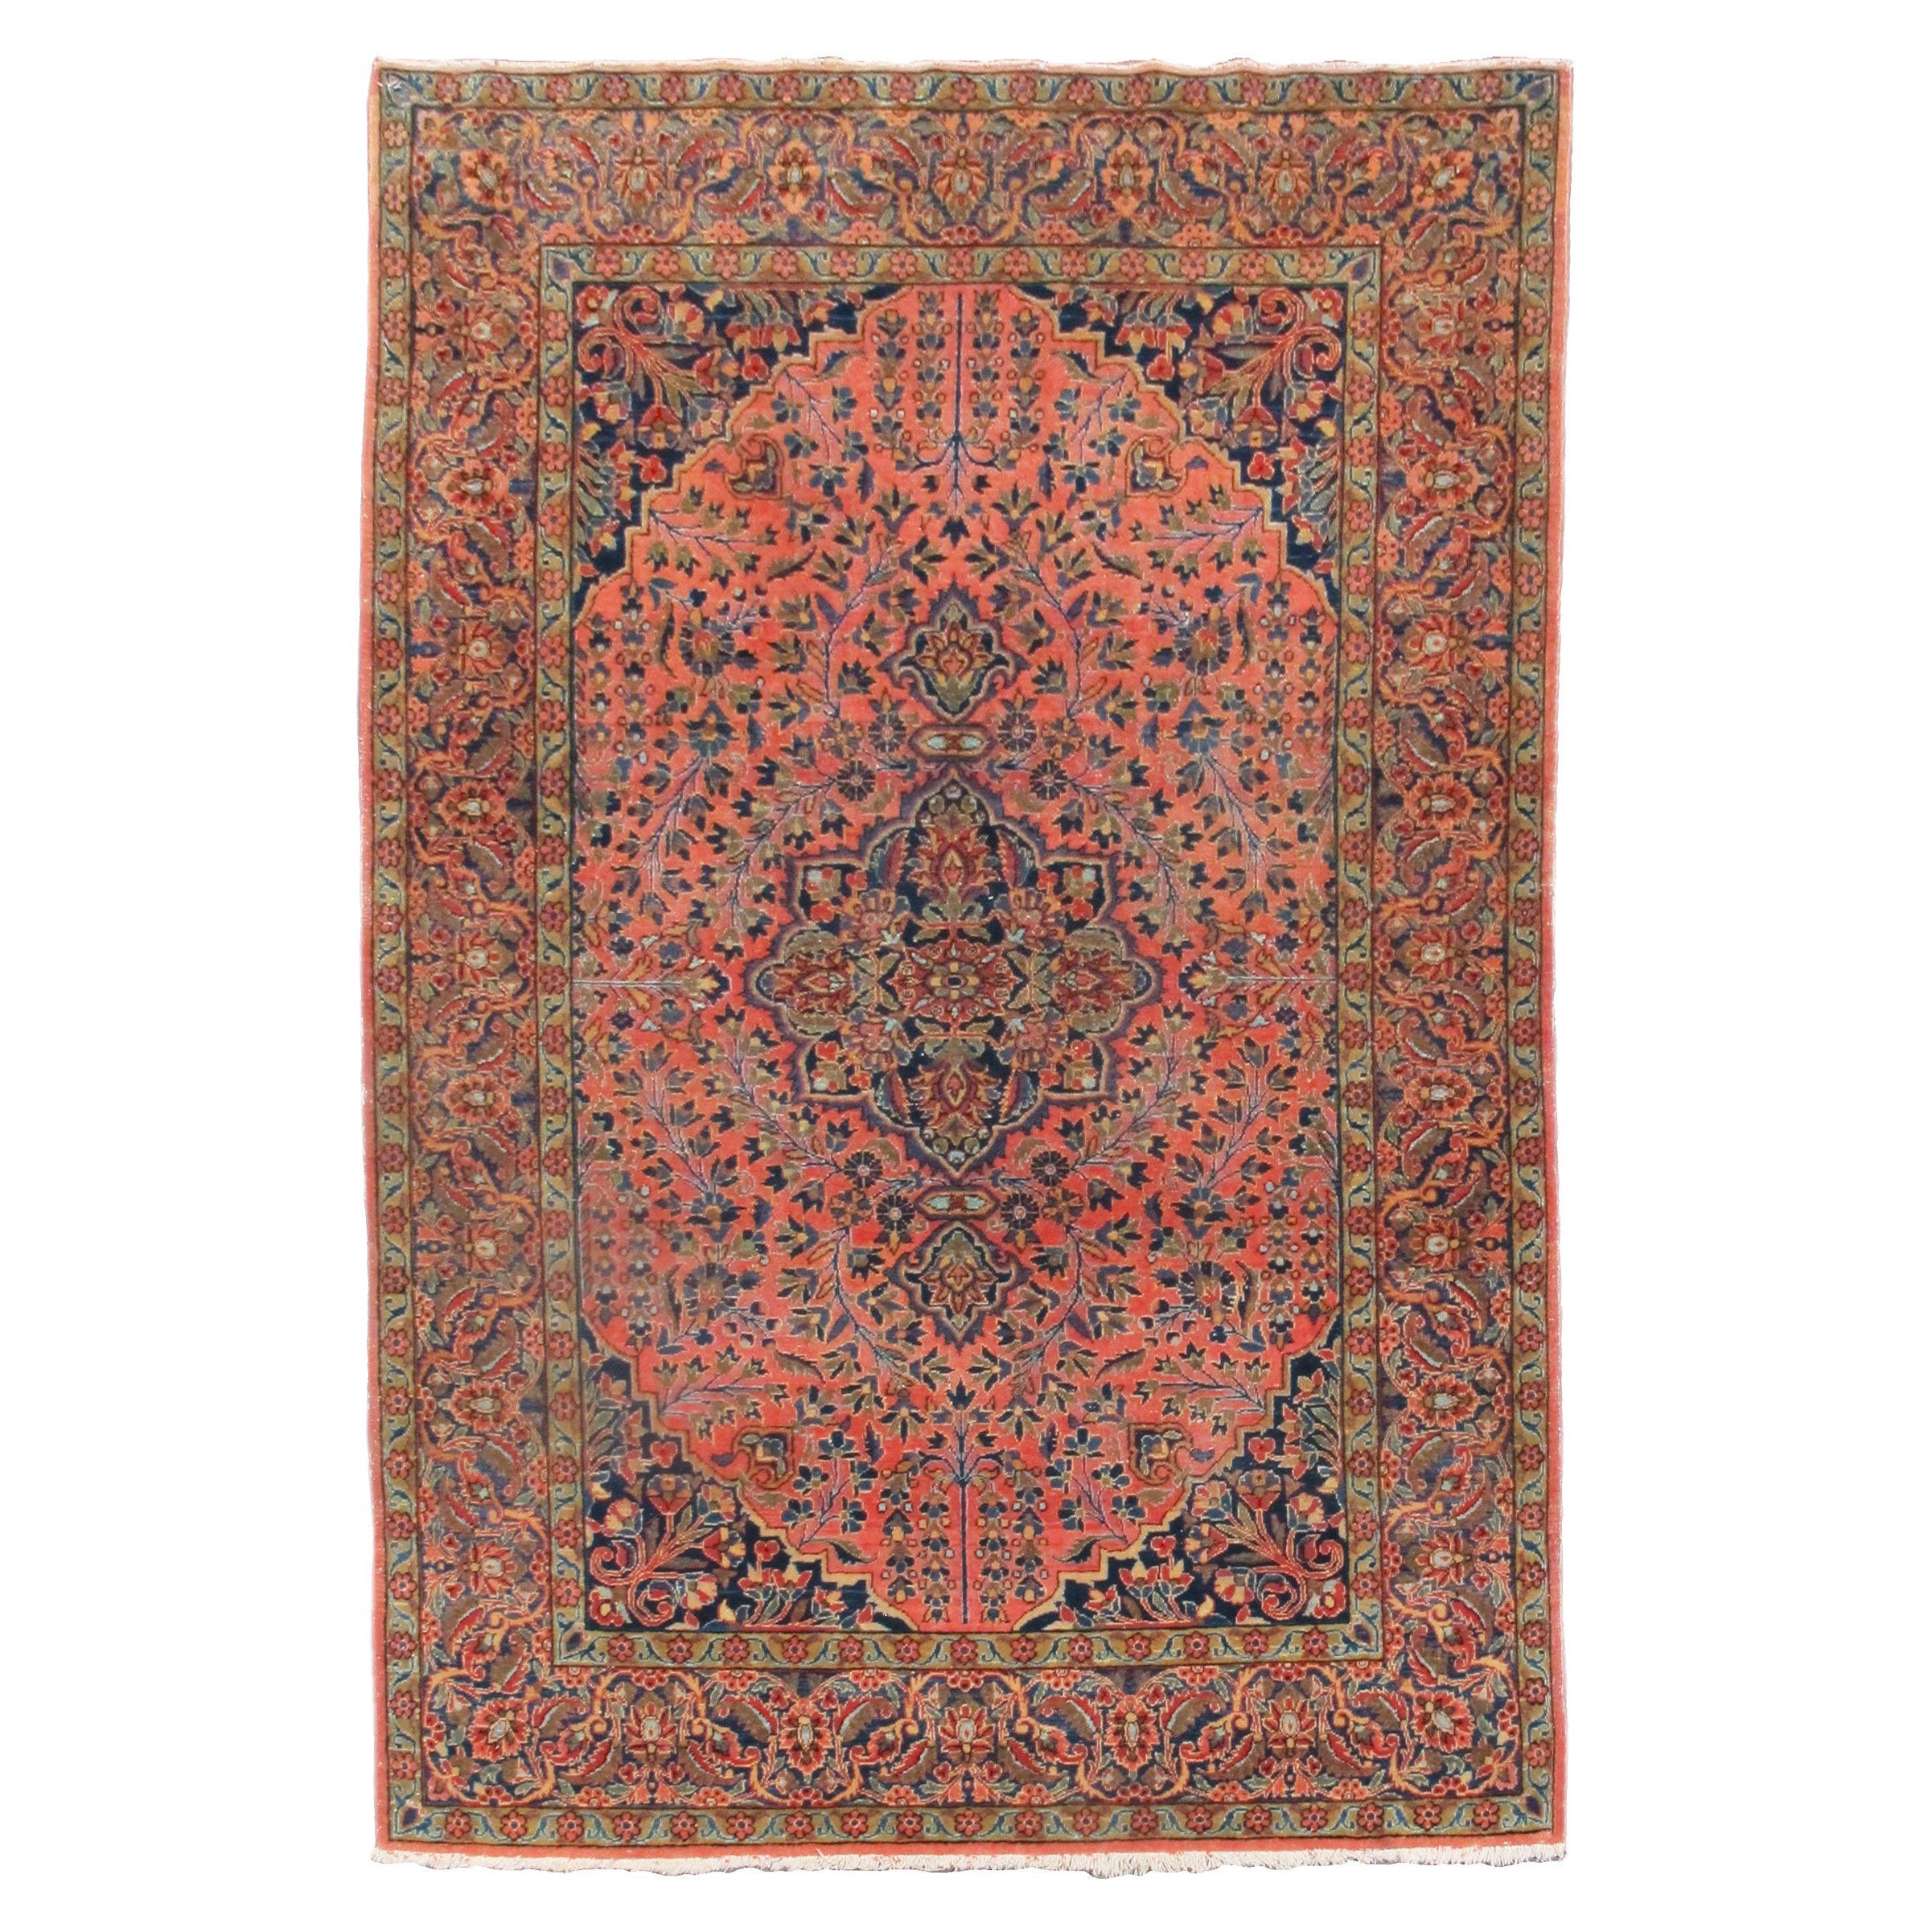 Antique Persian Kashan Rug, Early 20th Century